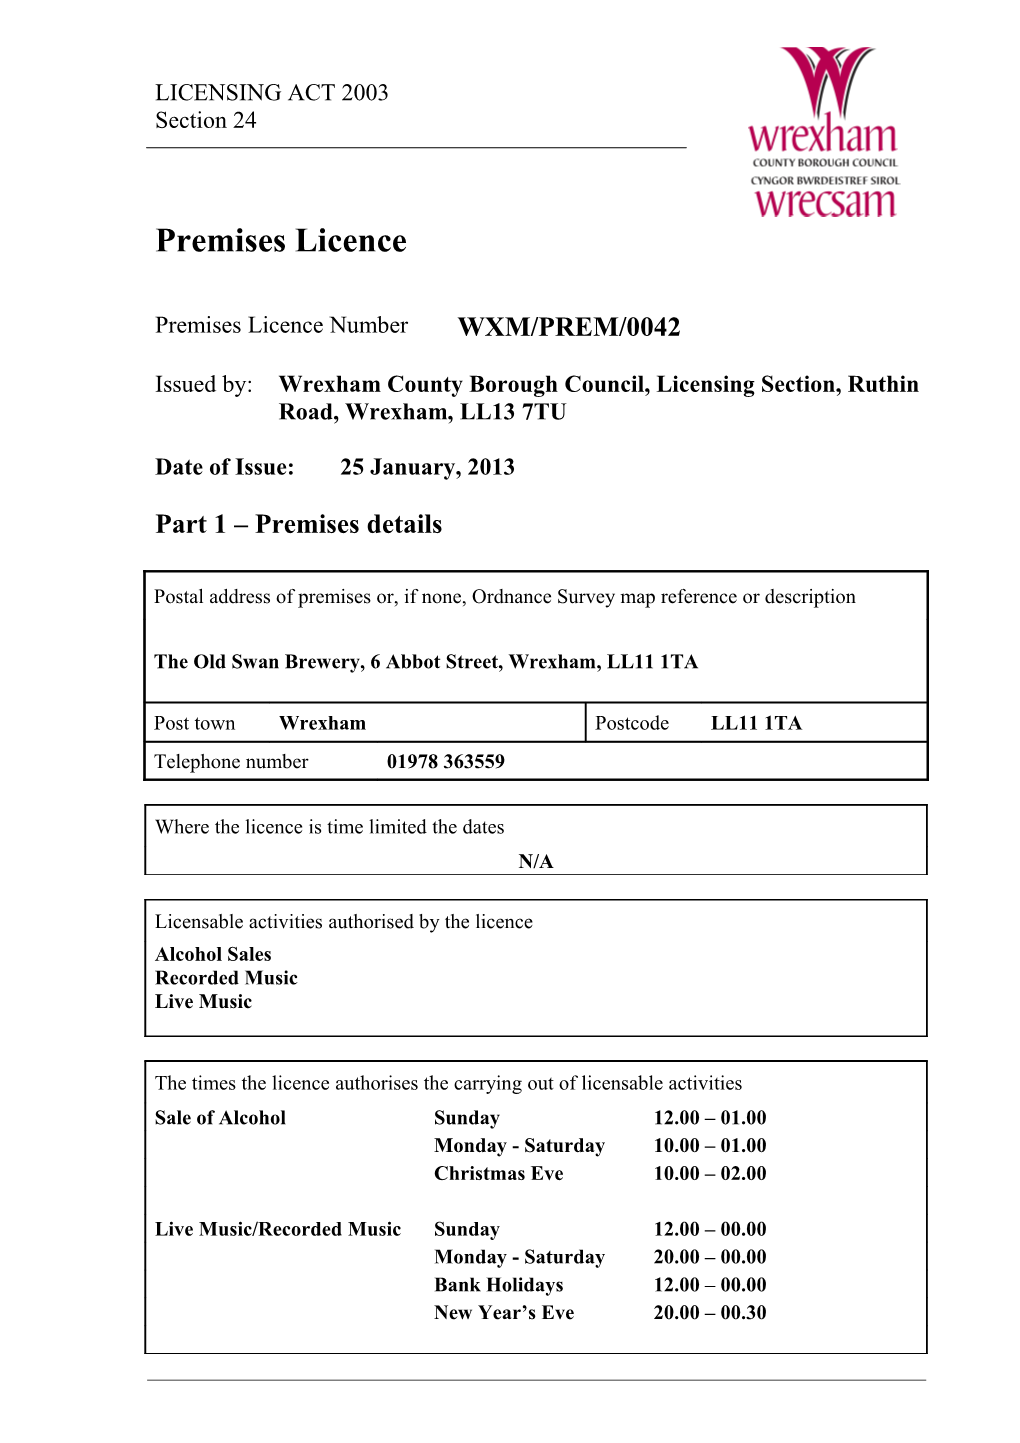 Issued By: Wrexhamcounty Borough Council, Licensing Section, Ruthin Road, Wrexham, LL13 7TU